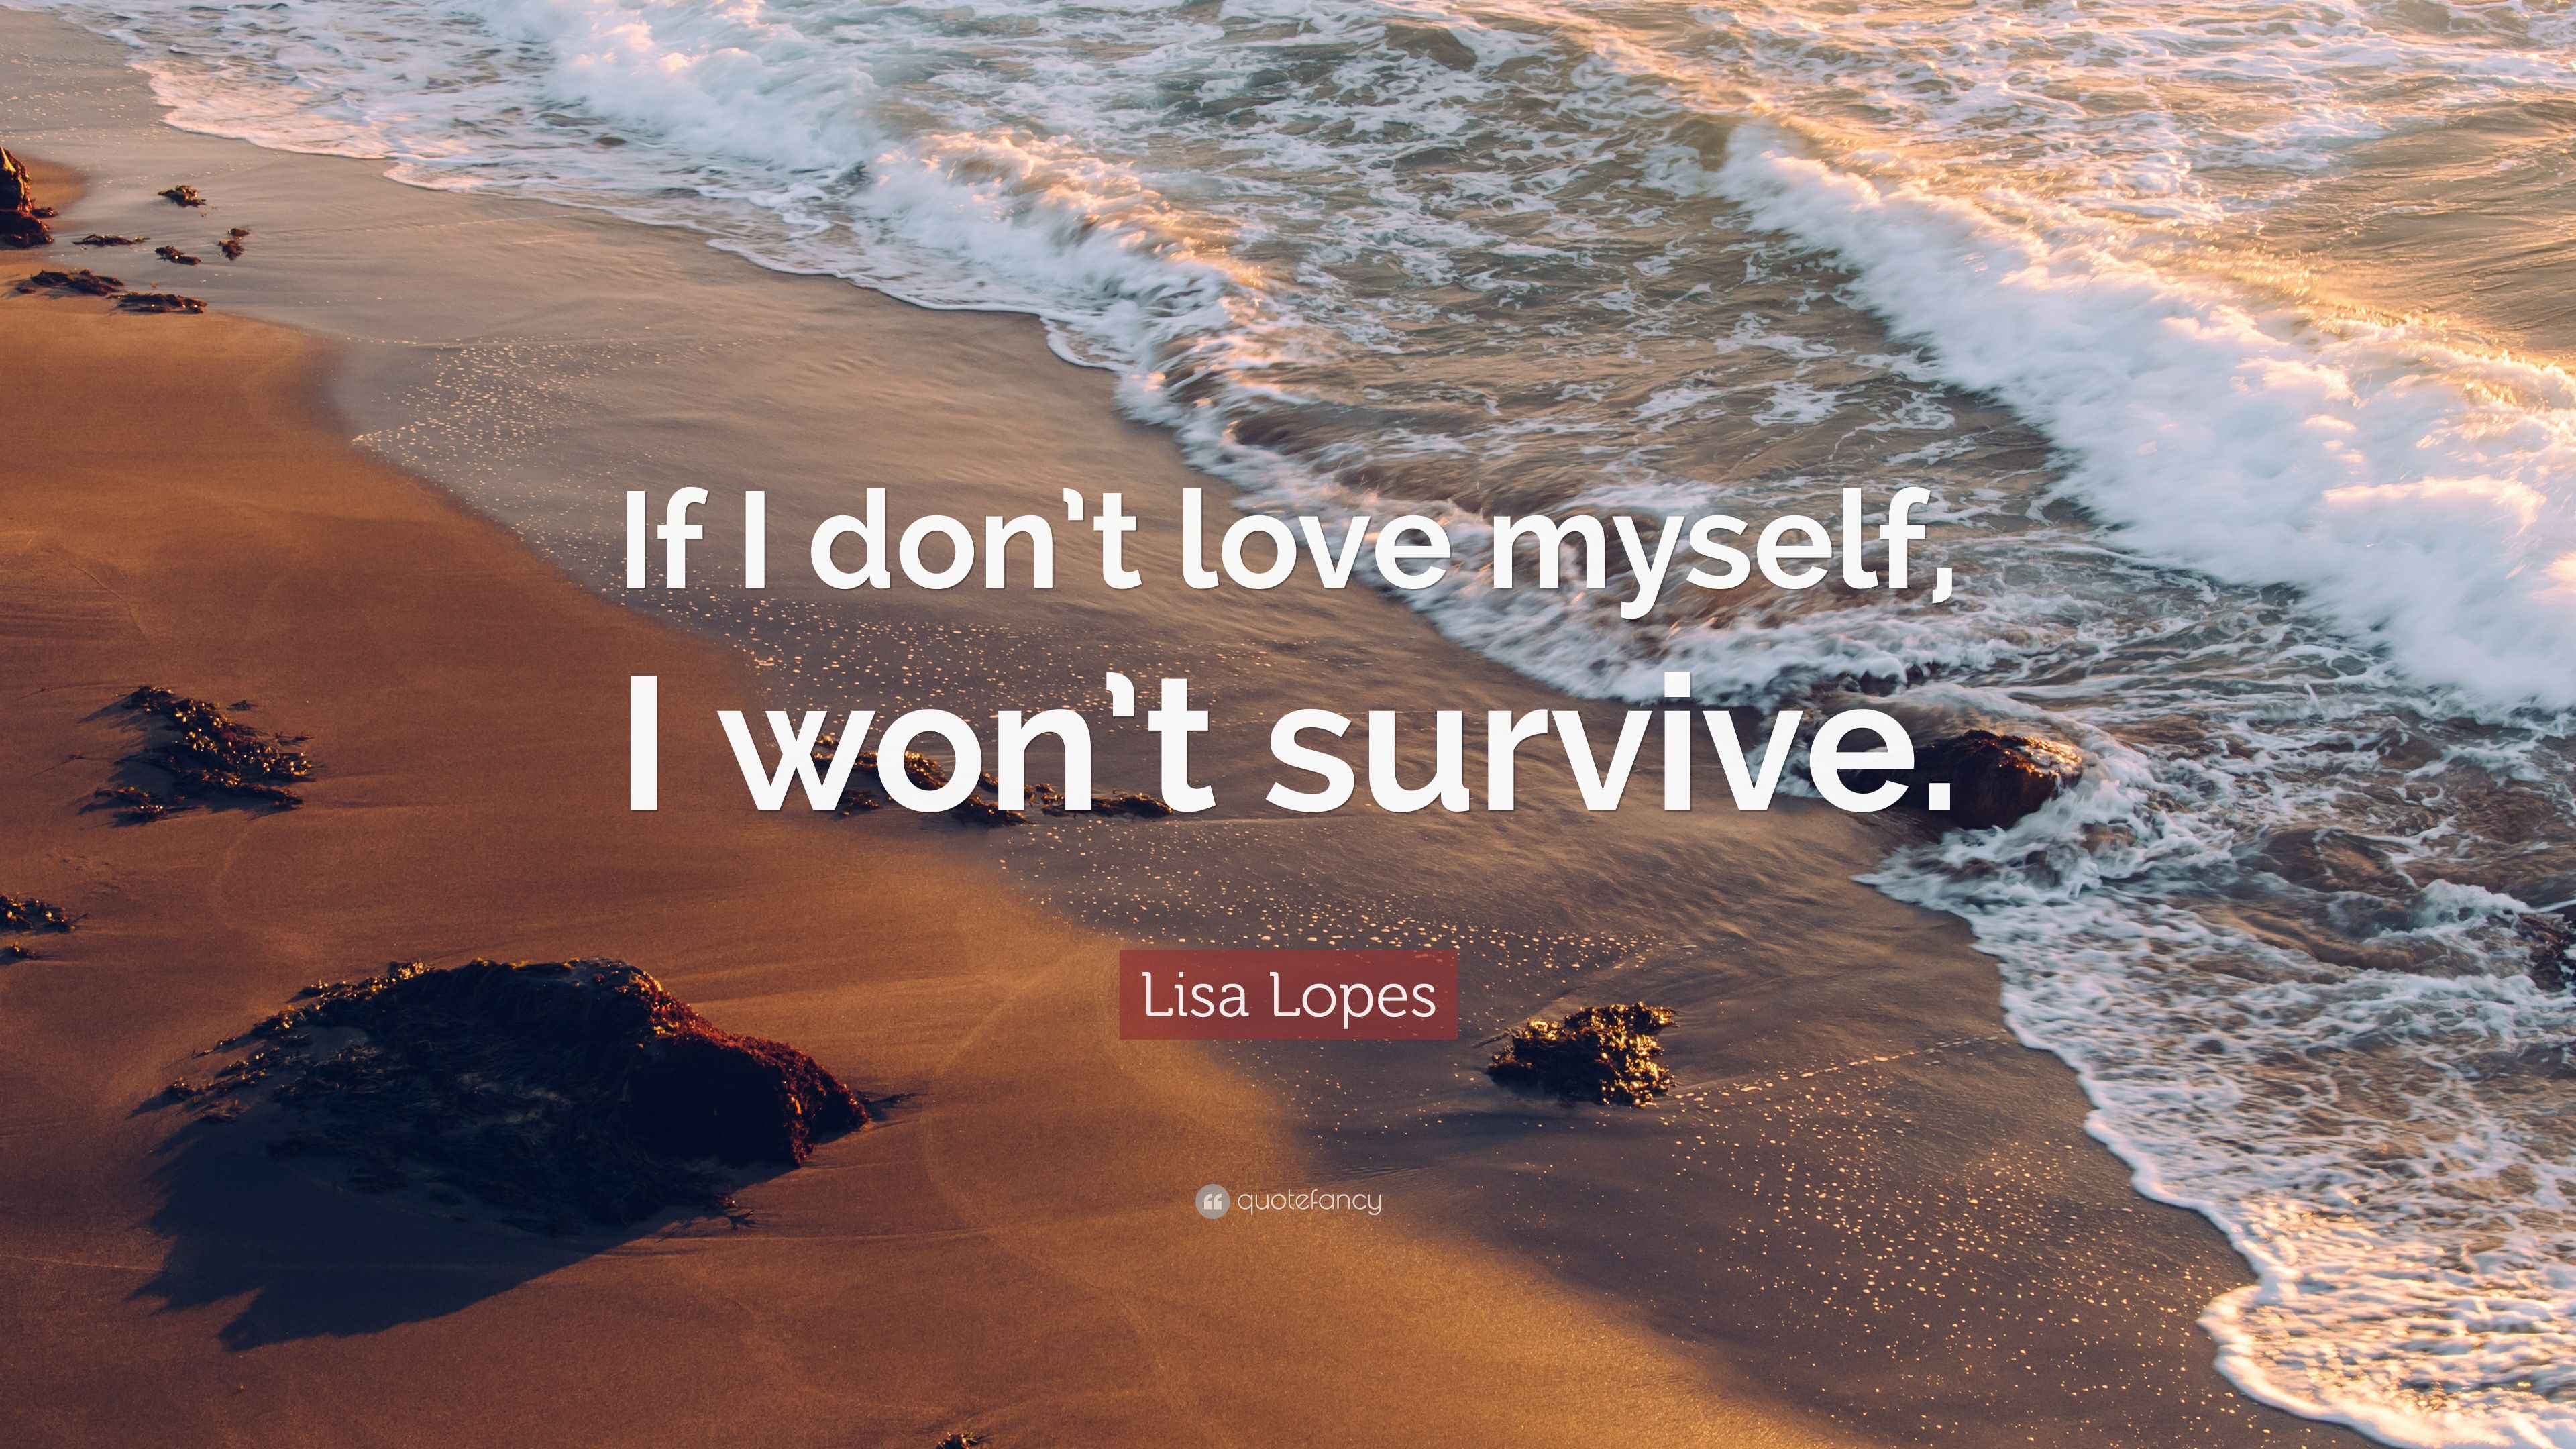 Lisa Lopes Quote: "If I don't love myself, I won't survive. 